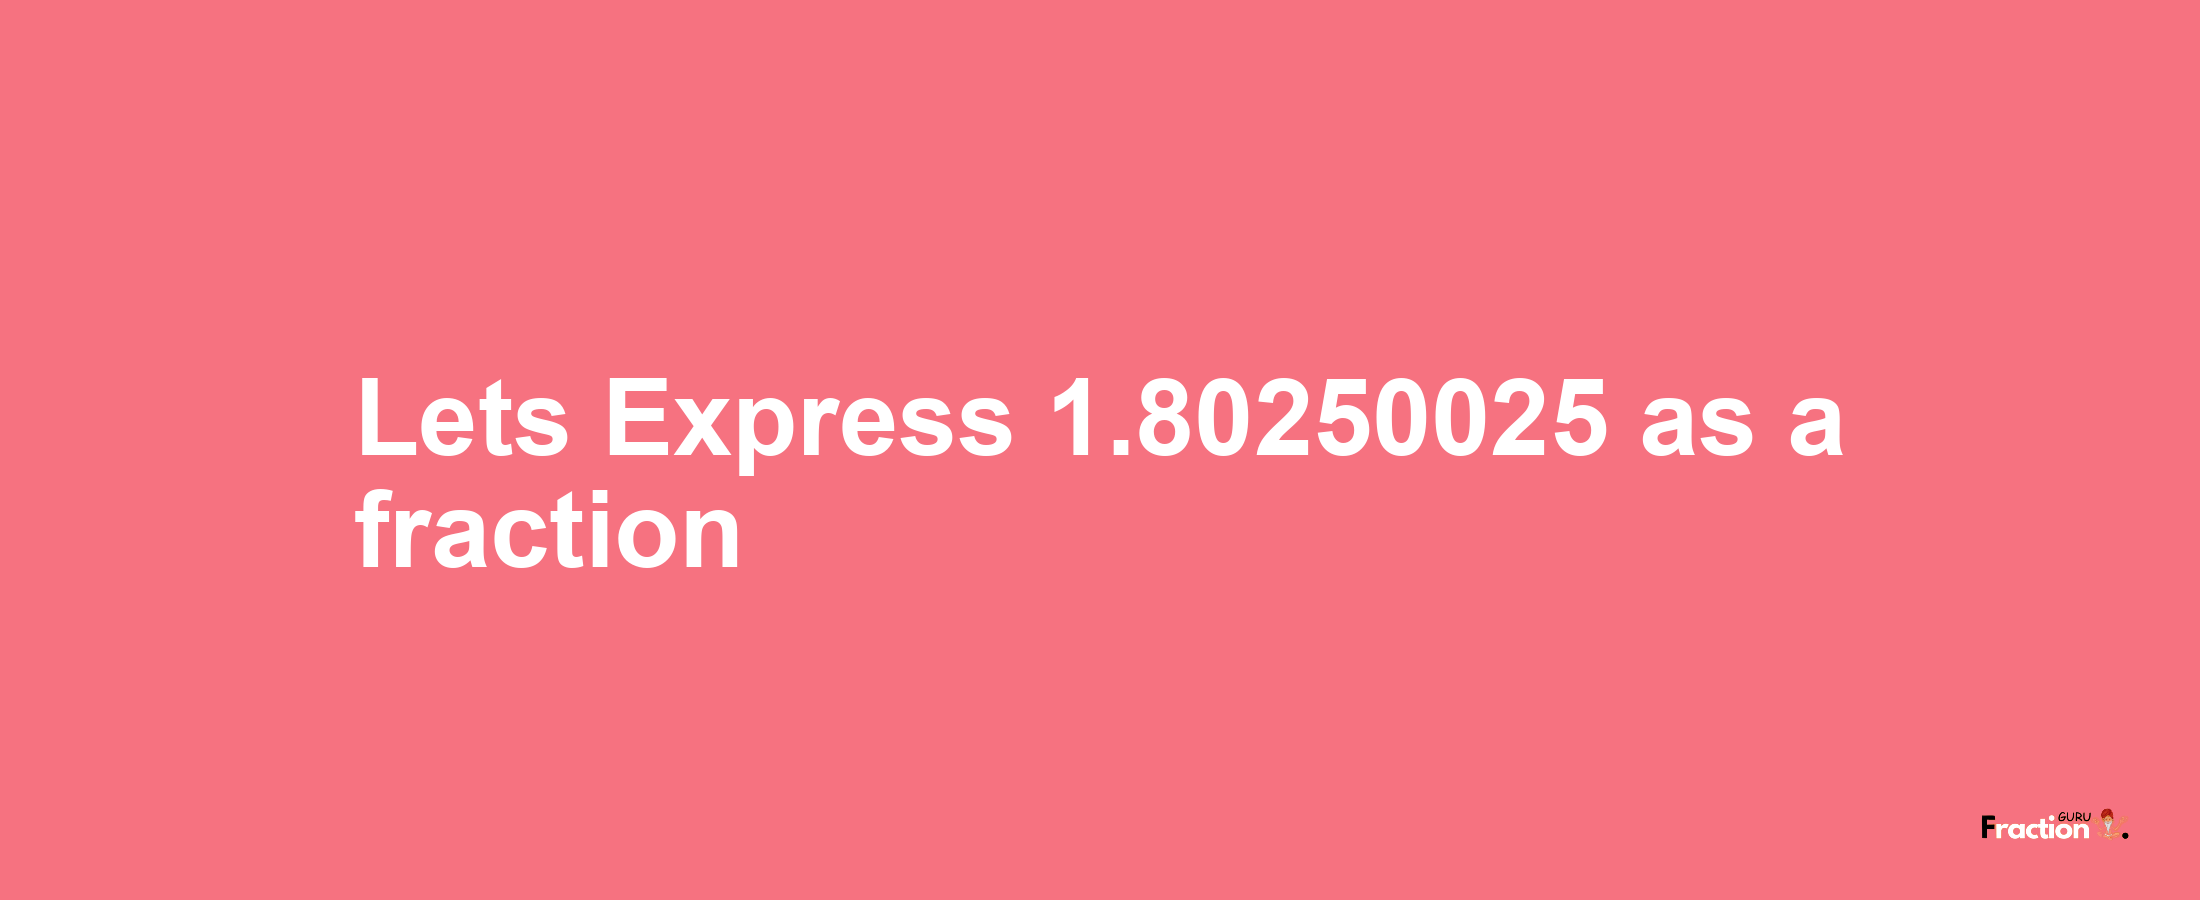 Lets Express 1.80250025 as afraction